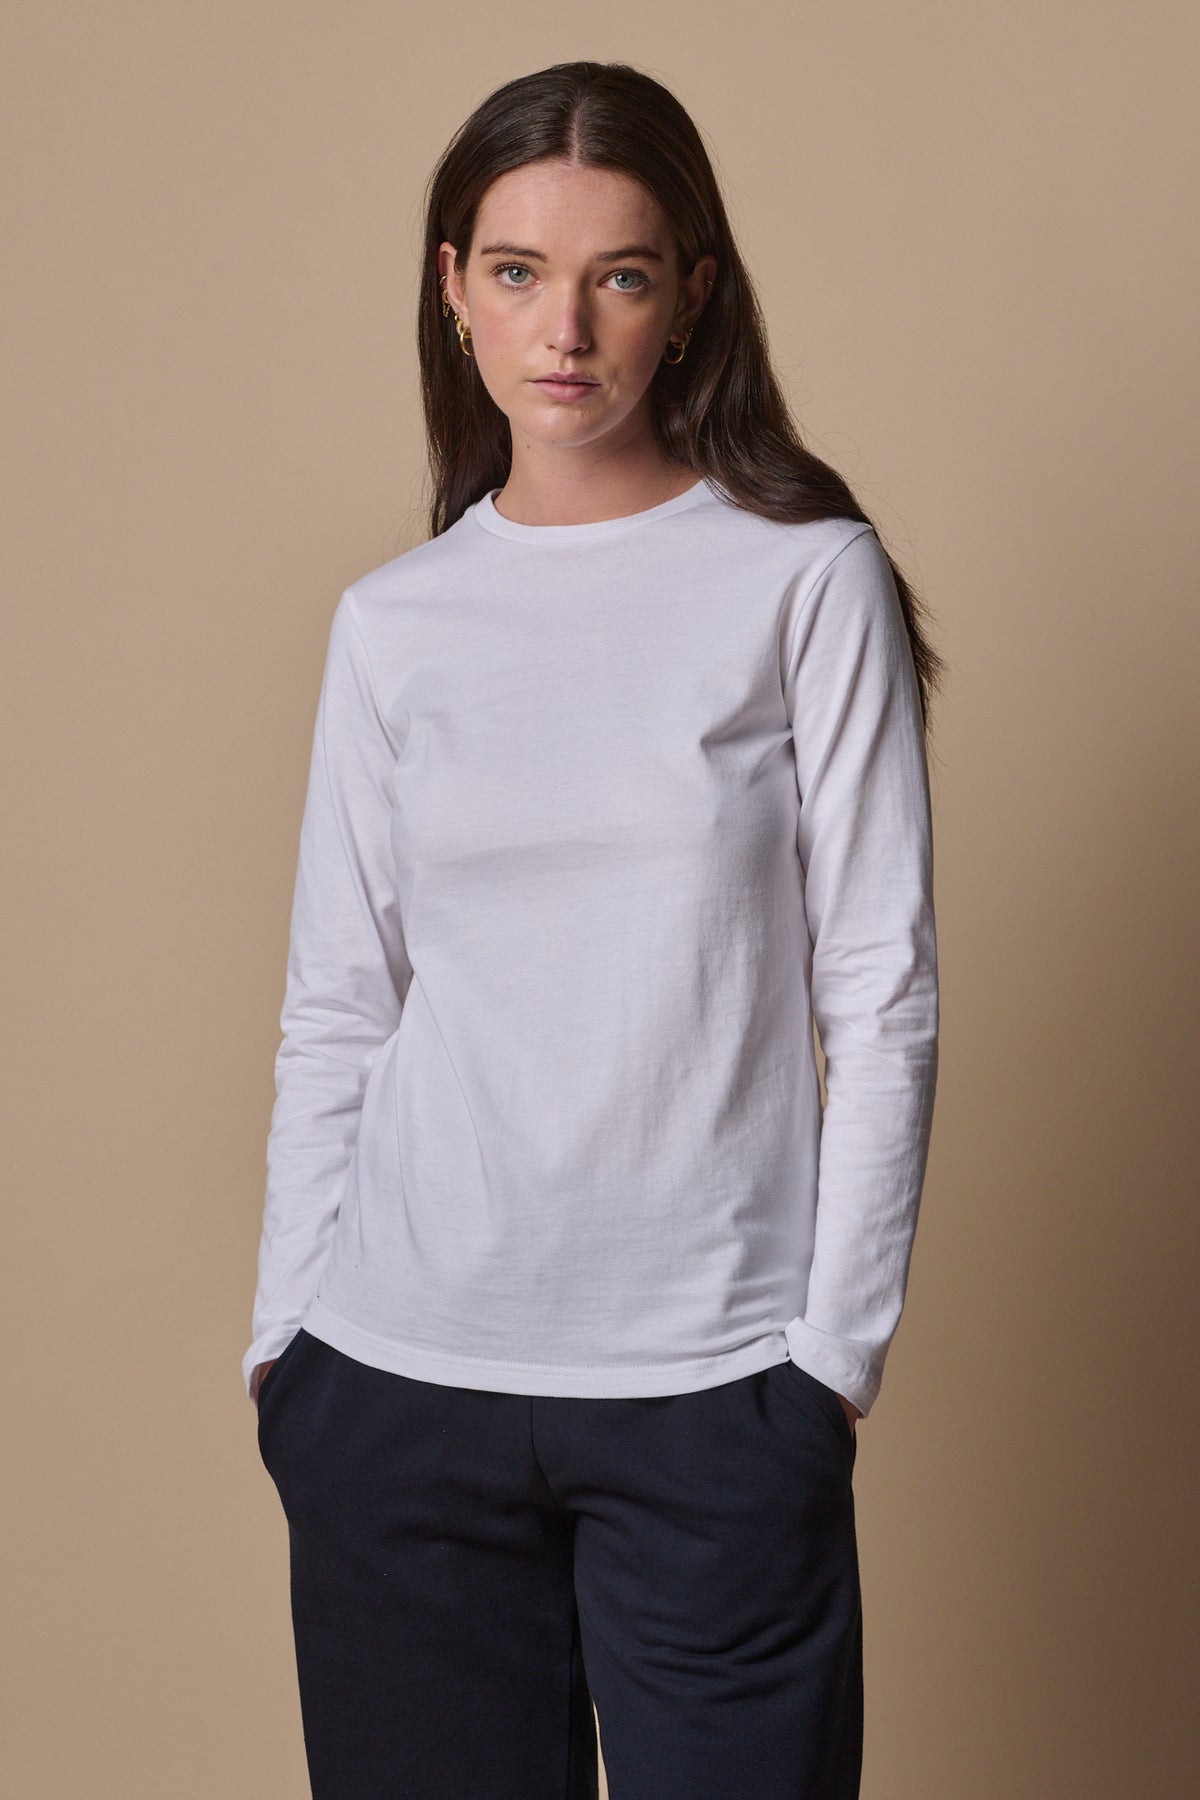 
            Brunette female wearing long sleeve t shirt in white with hands in pockets of navy sweatspants